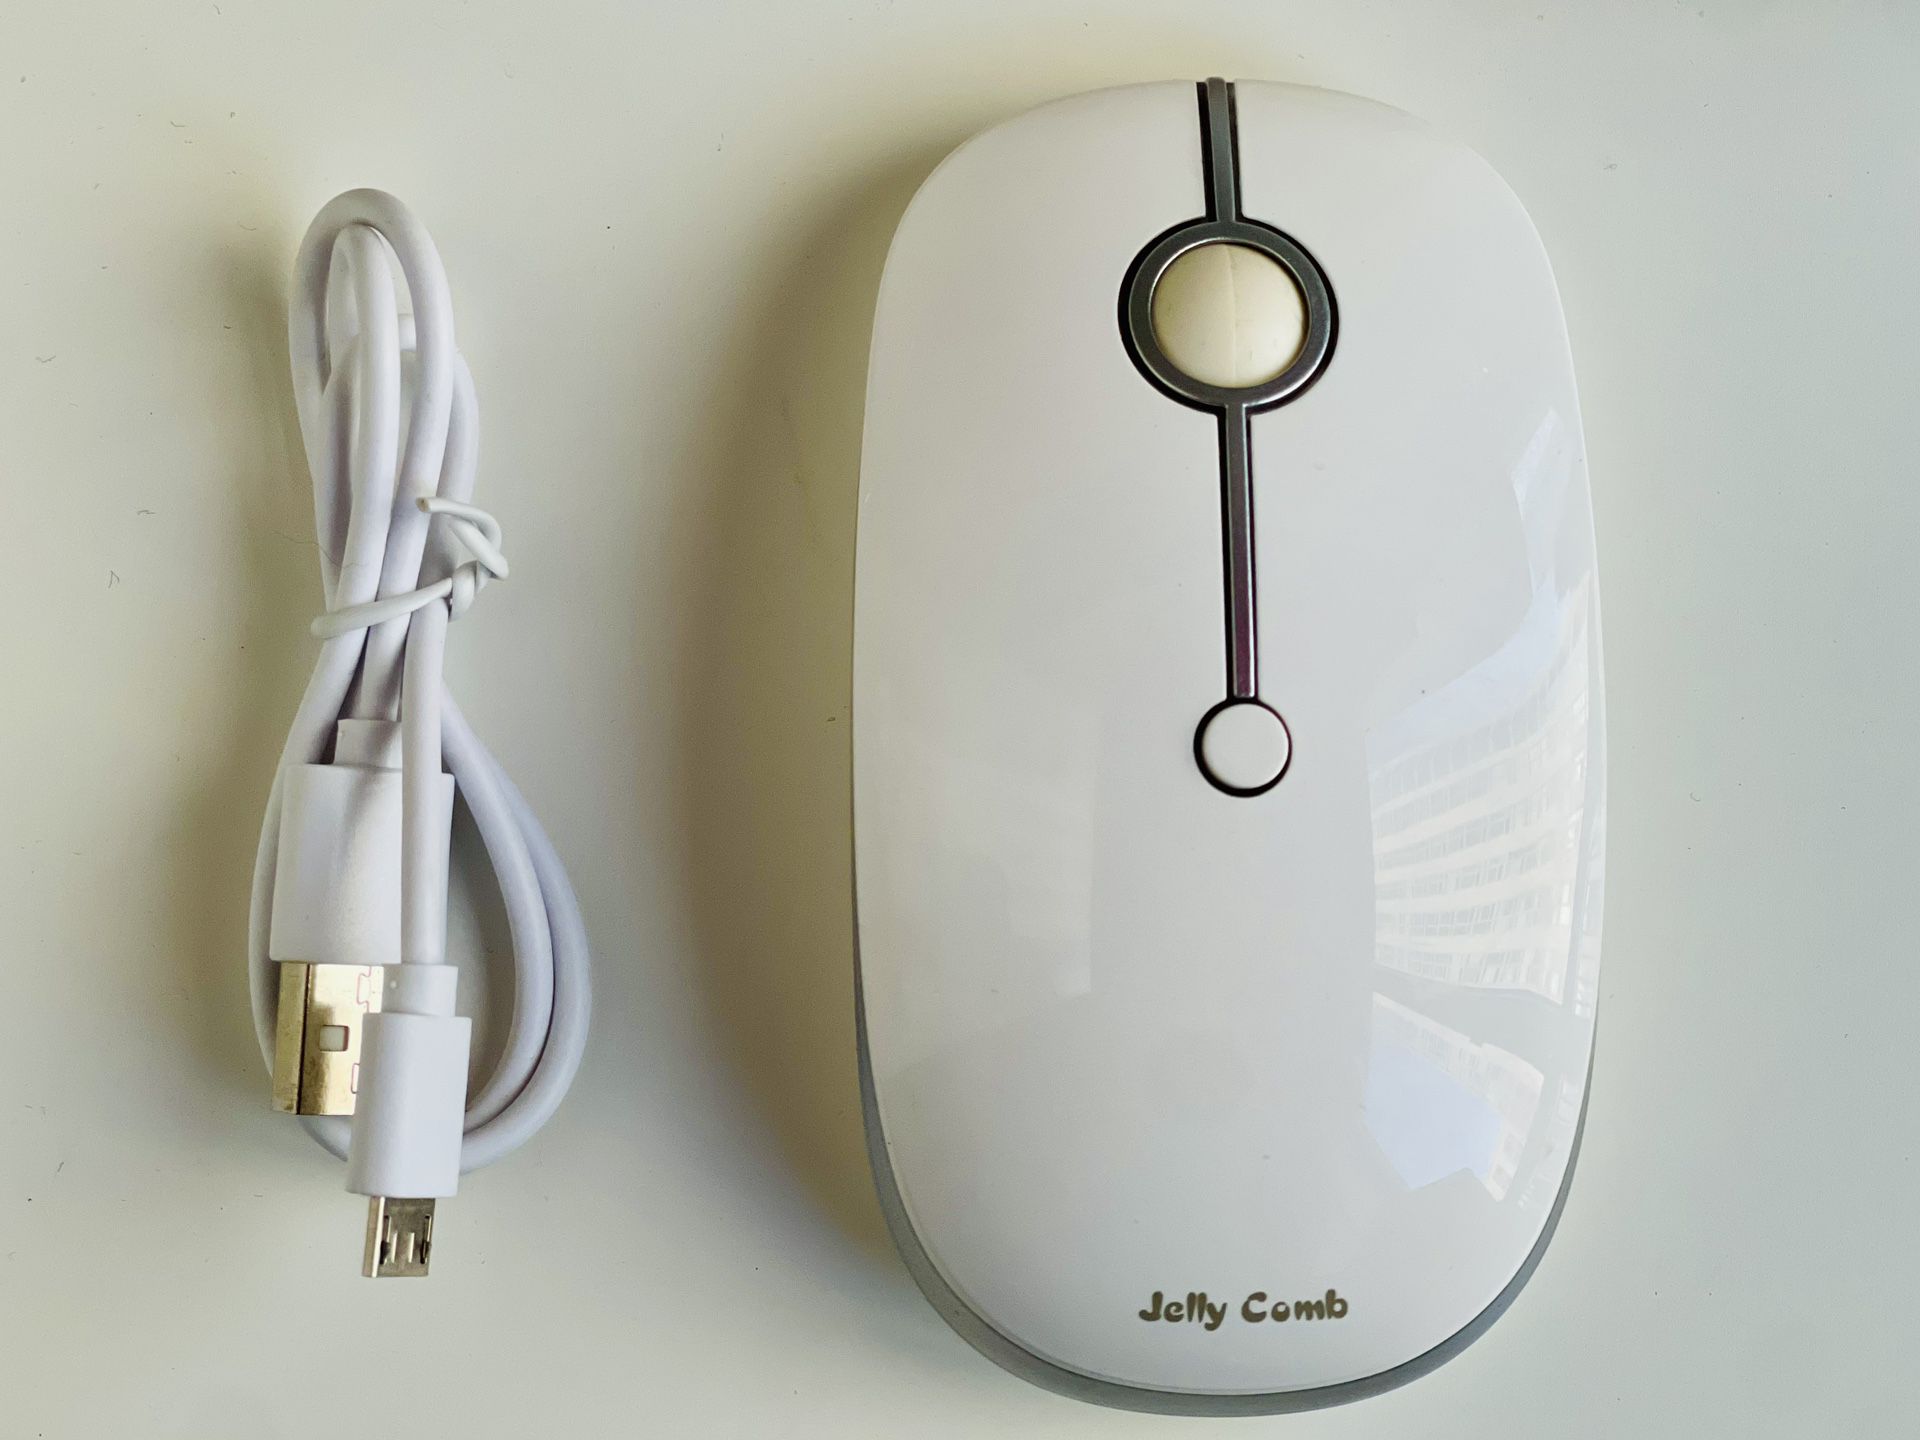 Jelly Comb Wireless Mouse - New